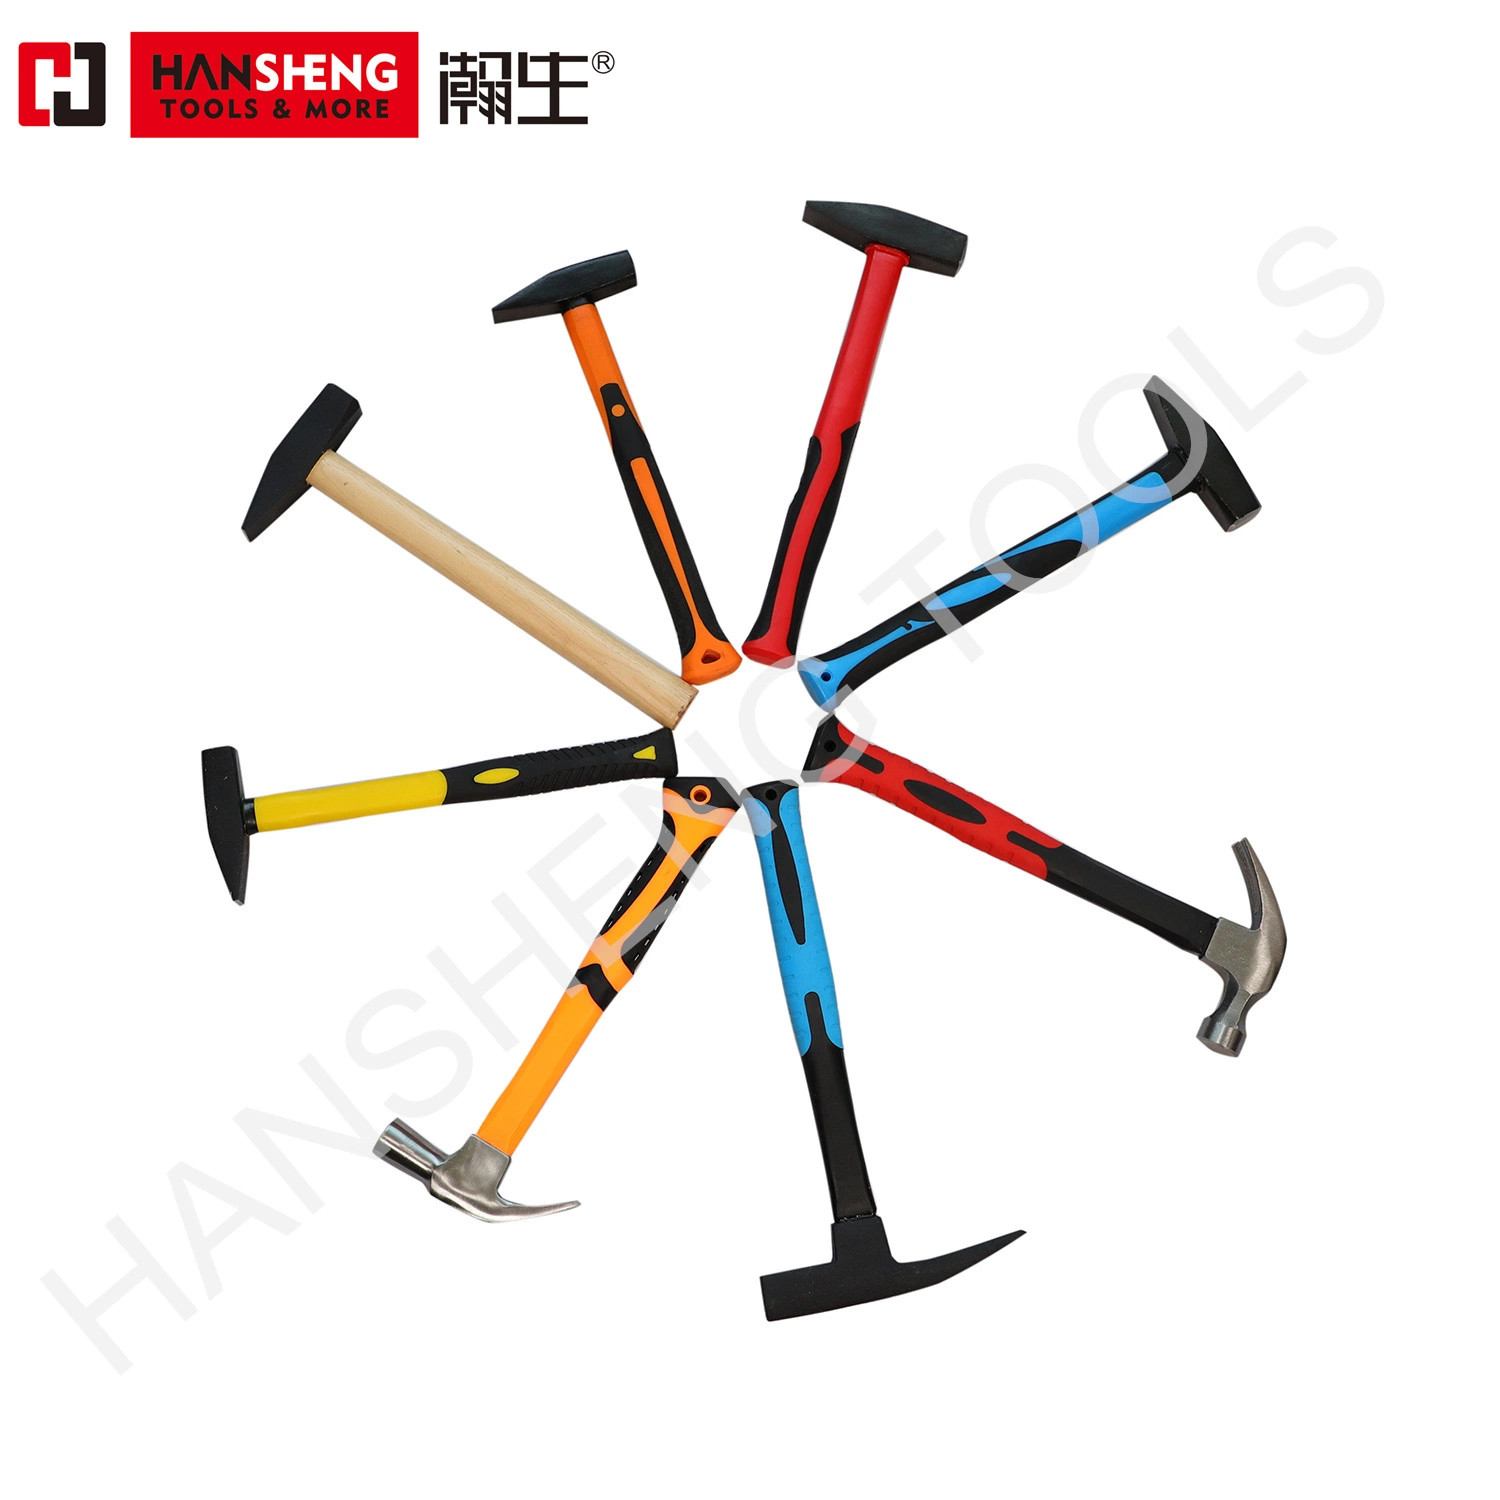 Made of Carbon Steel,PVC Handle,Claw Hammer,Rubber Hammer,Machinist Hammer,Removable,The Longer Handle Stoning Hammer,Bricklayer Hammer,Bottle Opener Hammer